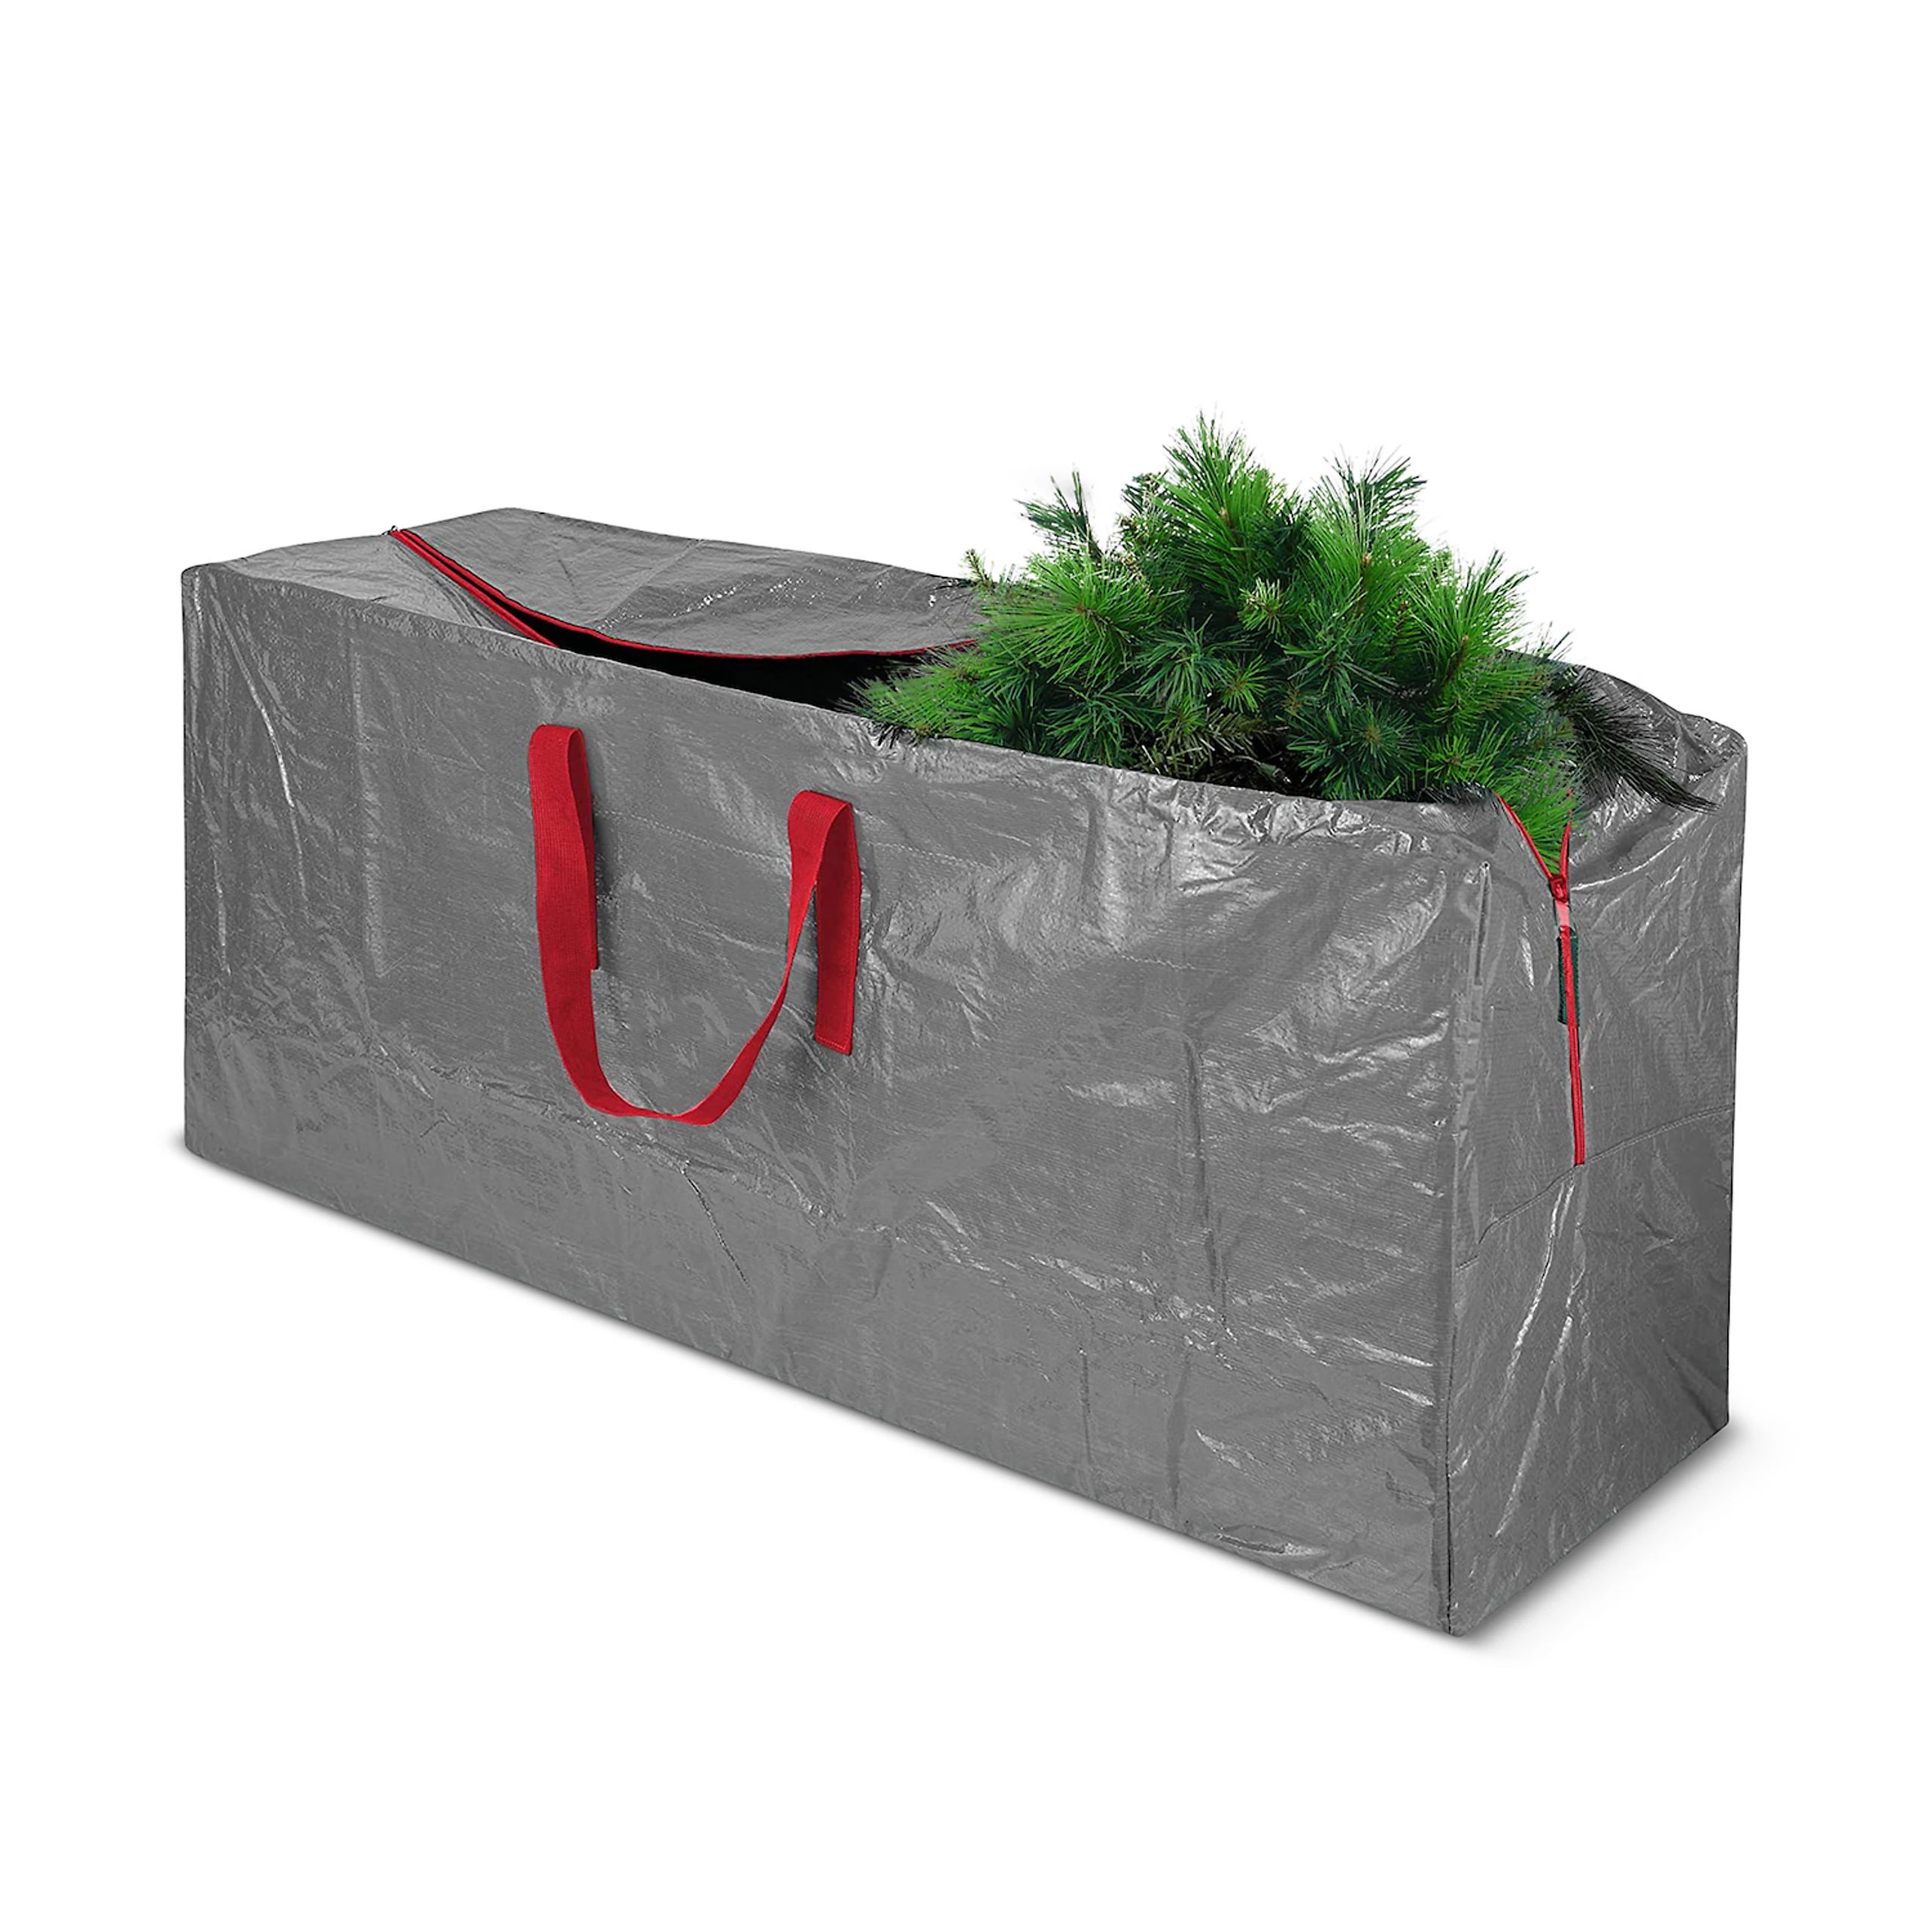 OSTO Waterproof Artificial Christmas Tree Storage Bag for Disassembled Trees up to 9 Feet | Kohl's